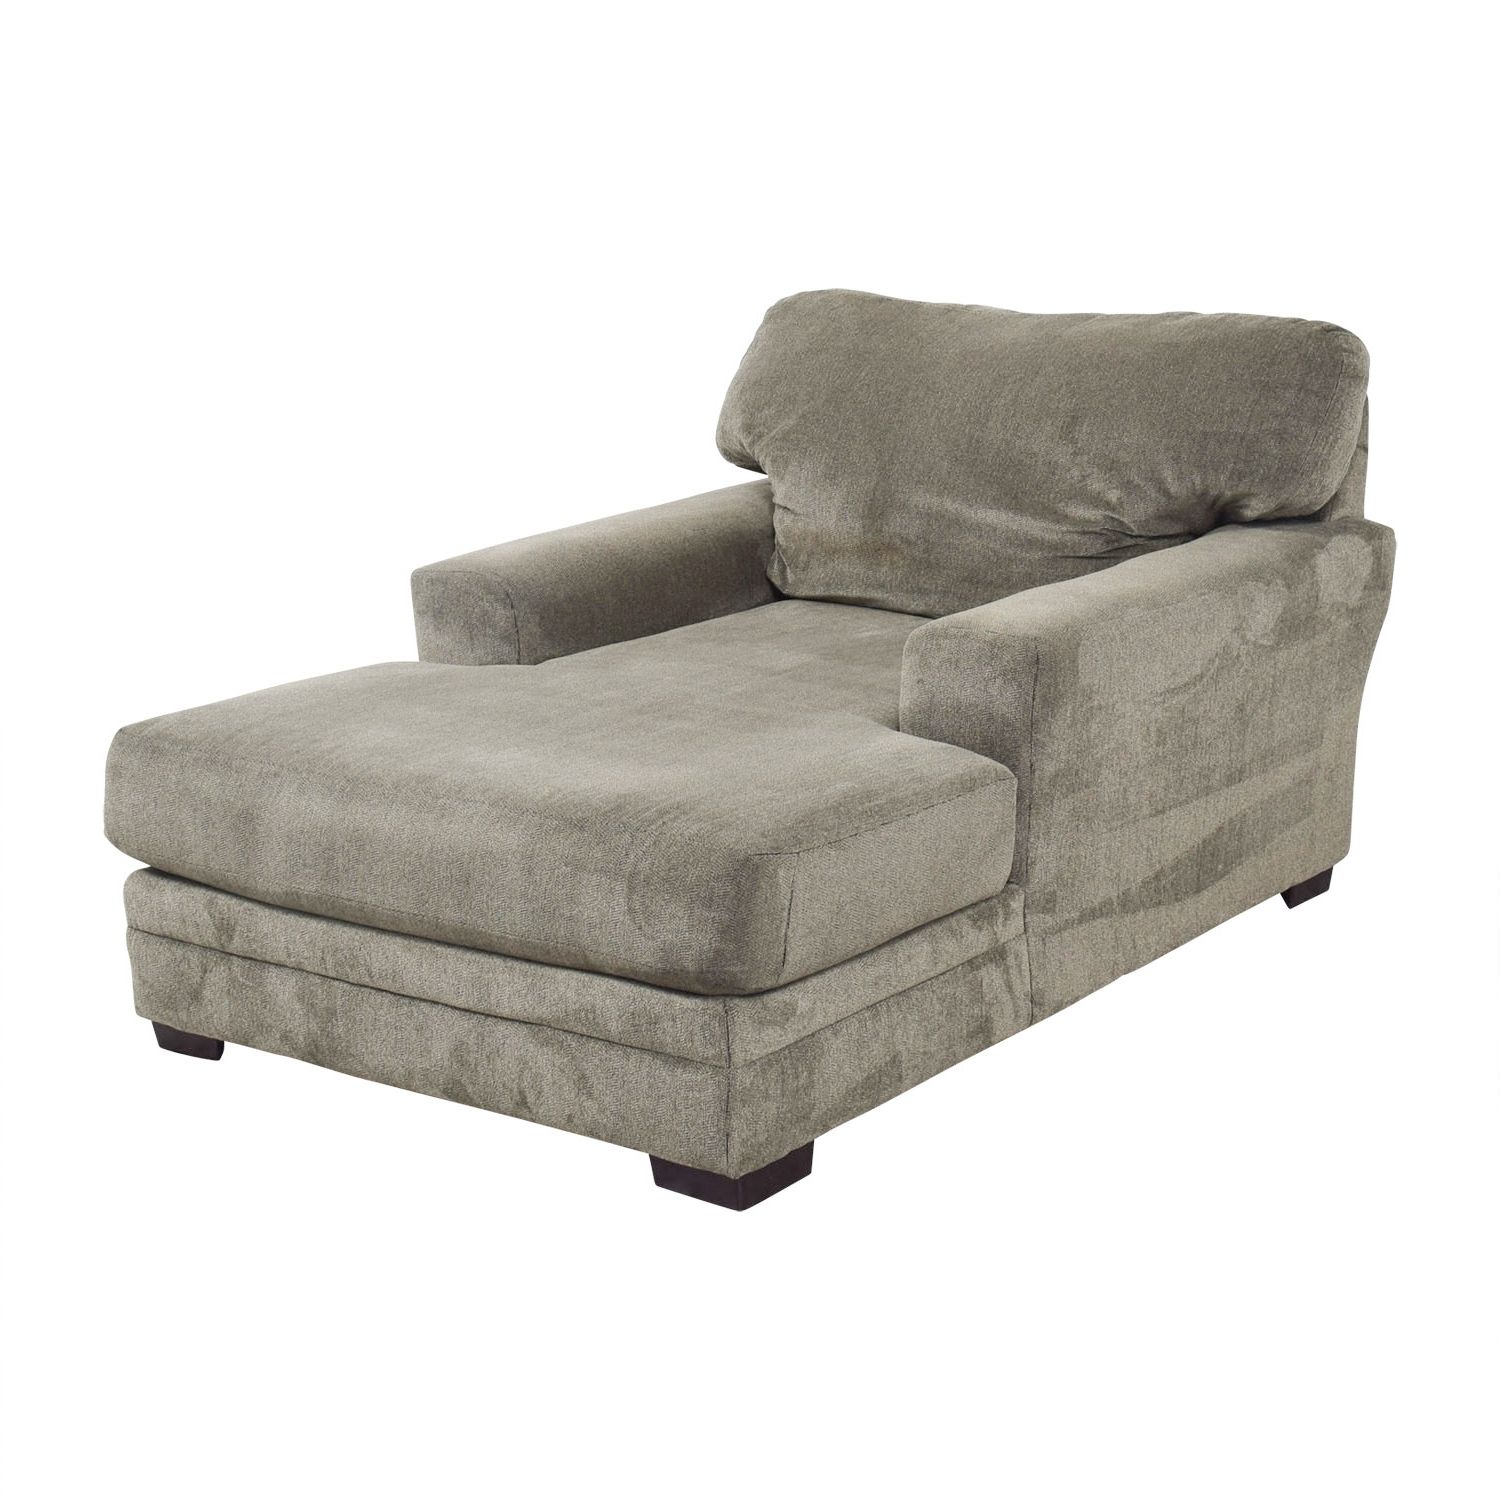 Most Current Grey Chaise Lounge Chairs Pertaining To Chaise Lounge Chair Bobs Furniture • Lounge Chairs Ideas (View 13 of 15)